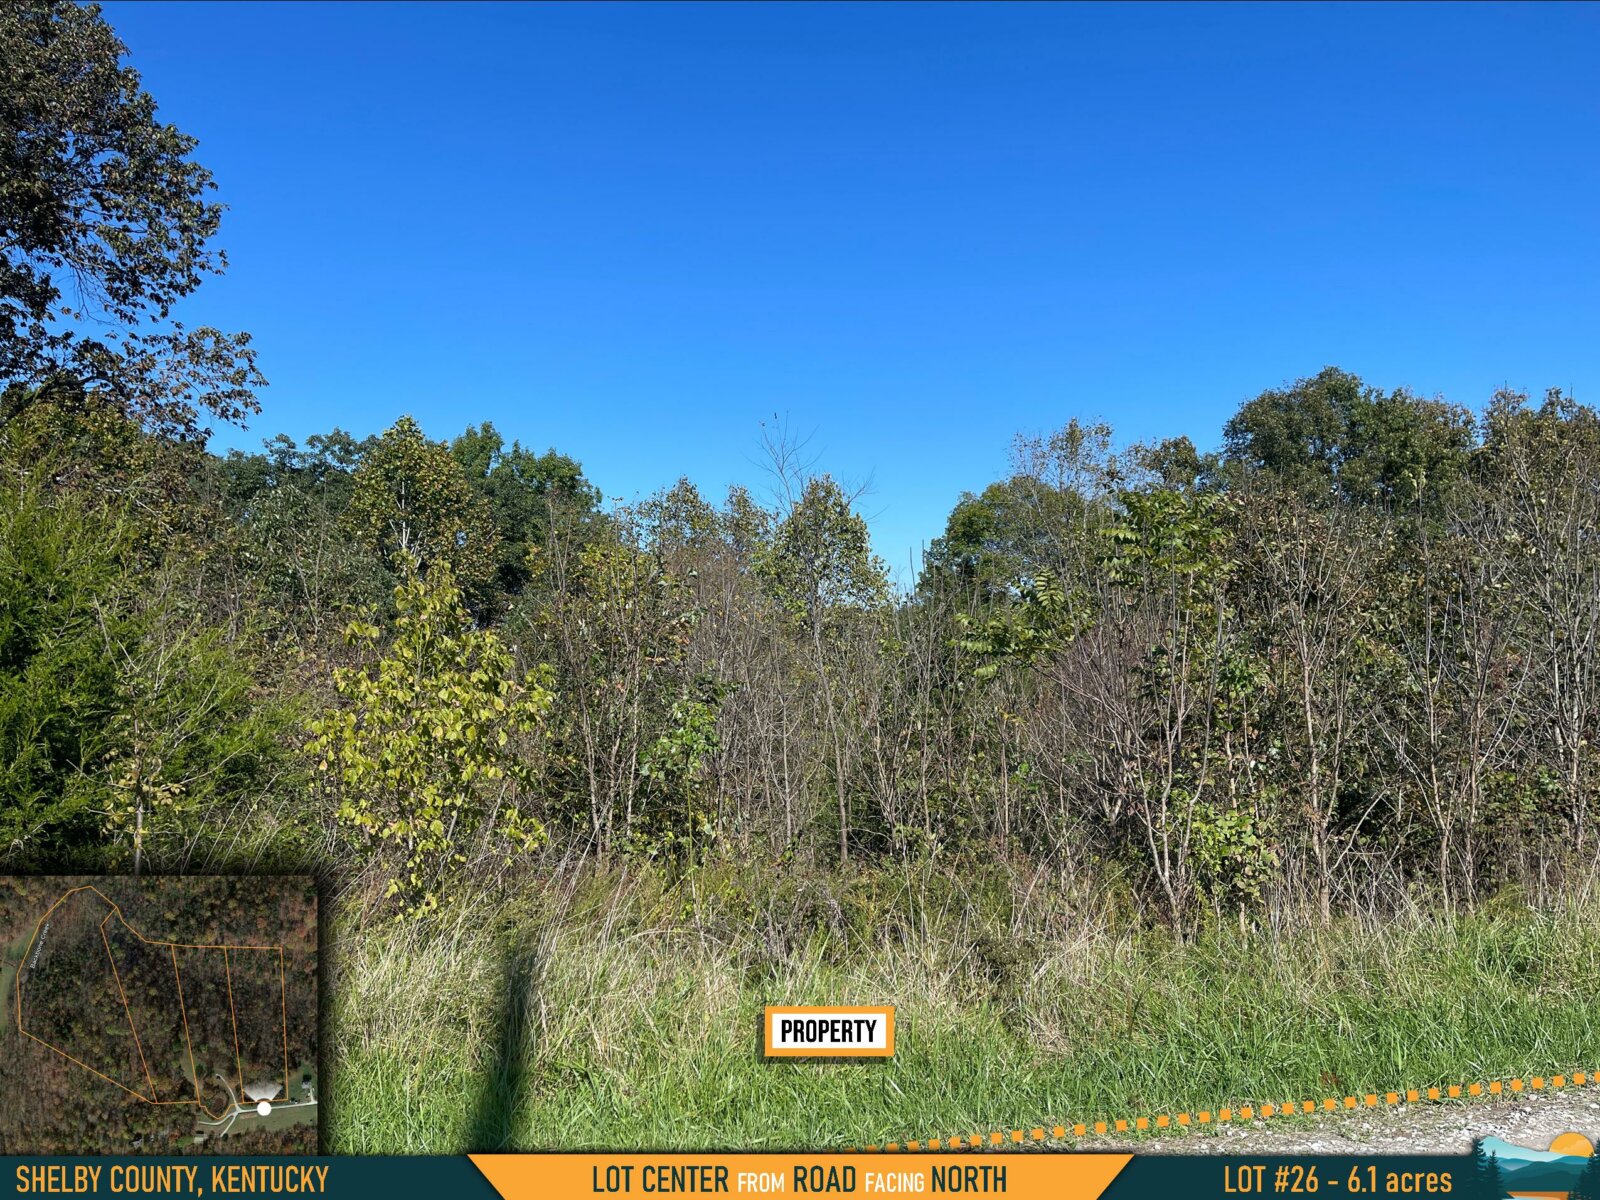 SHELBY COUNTY, KY | 6.1 acres | The “Easy Goer” Lot | Lowest-priced 6 acres in the County